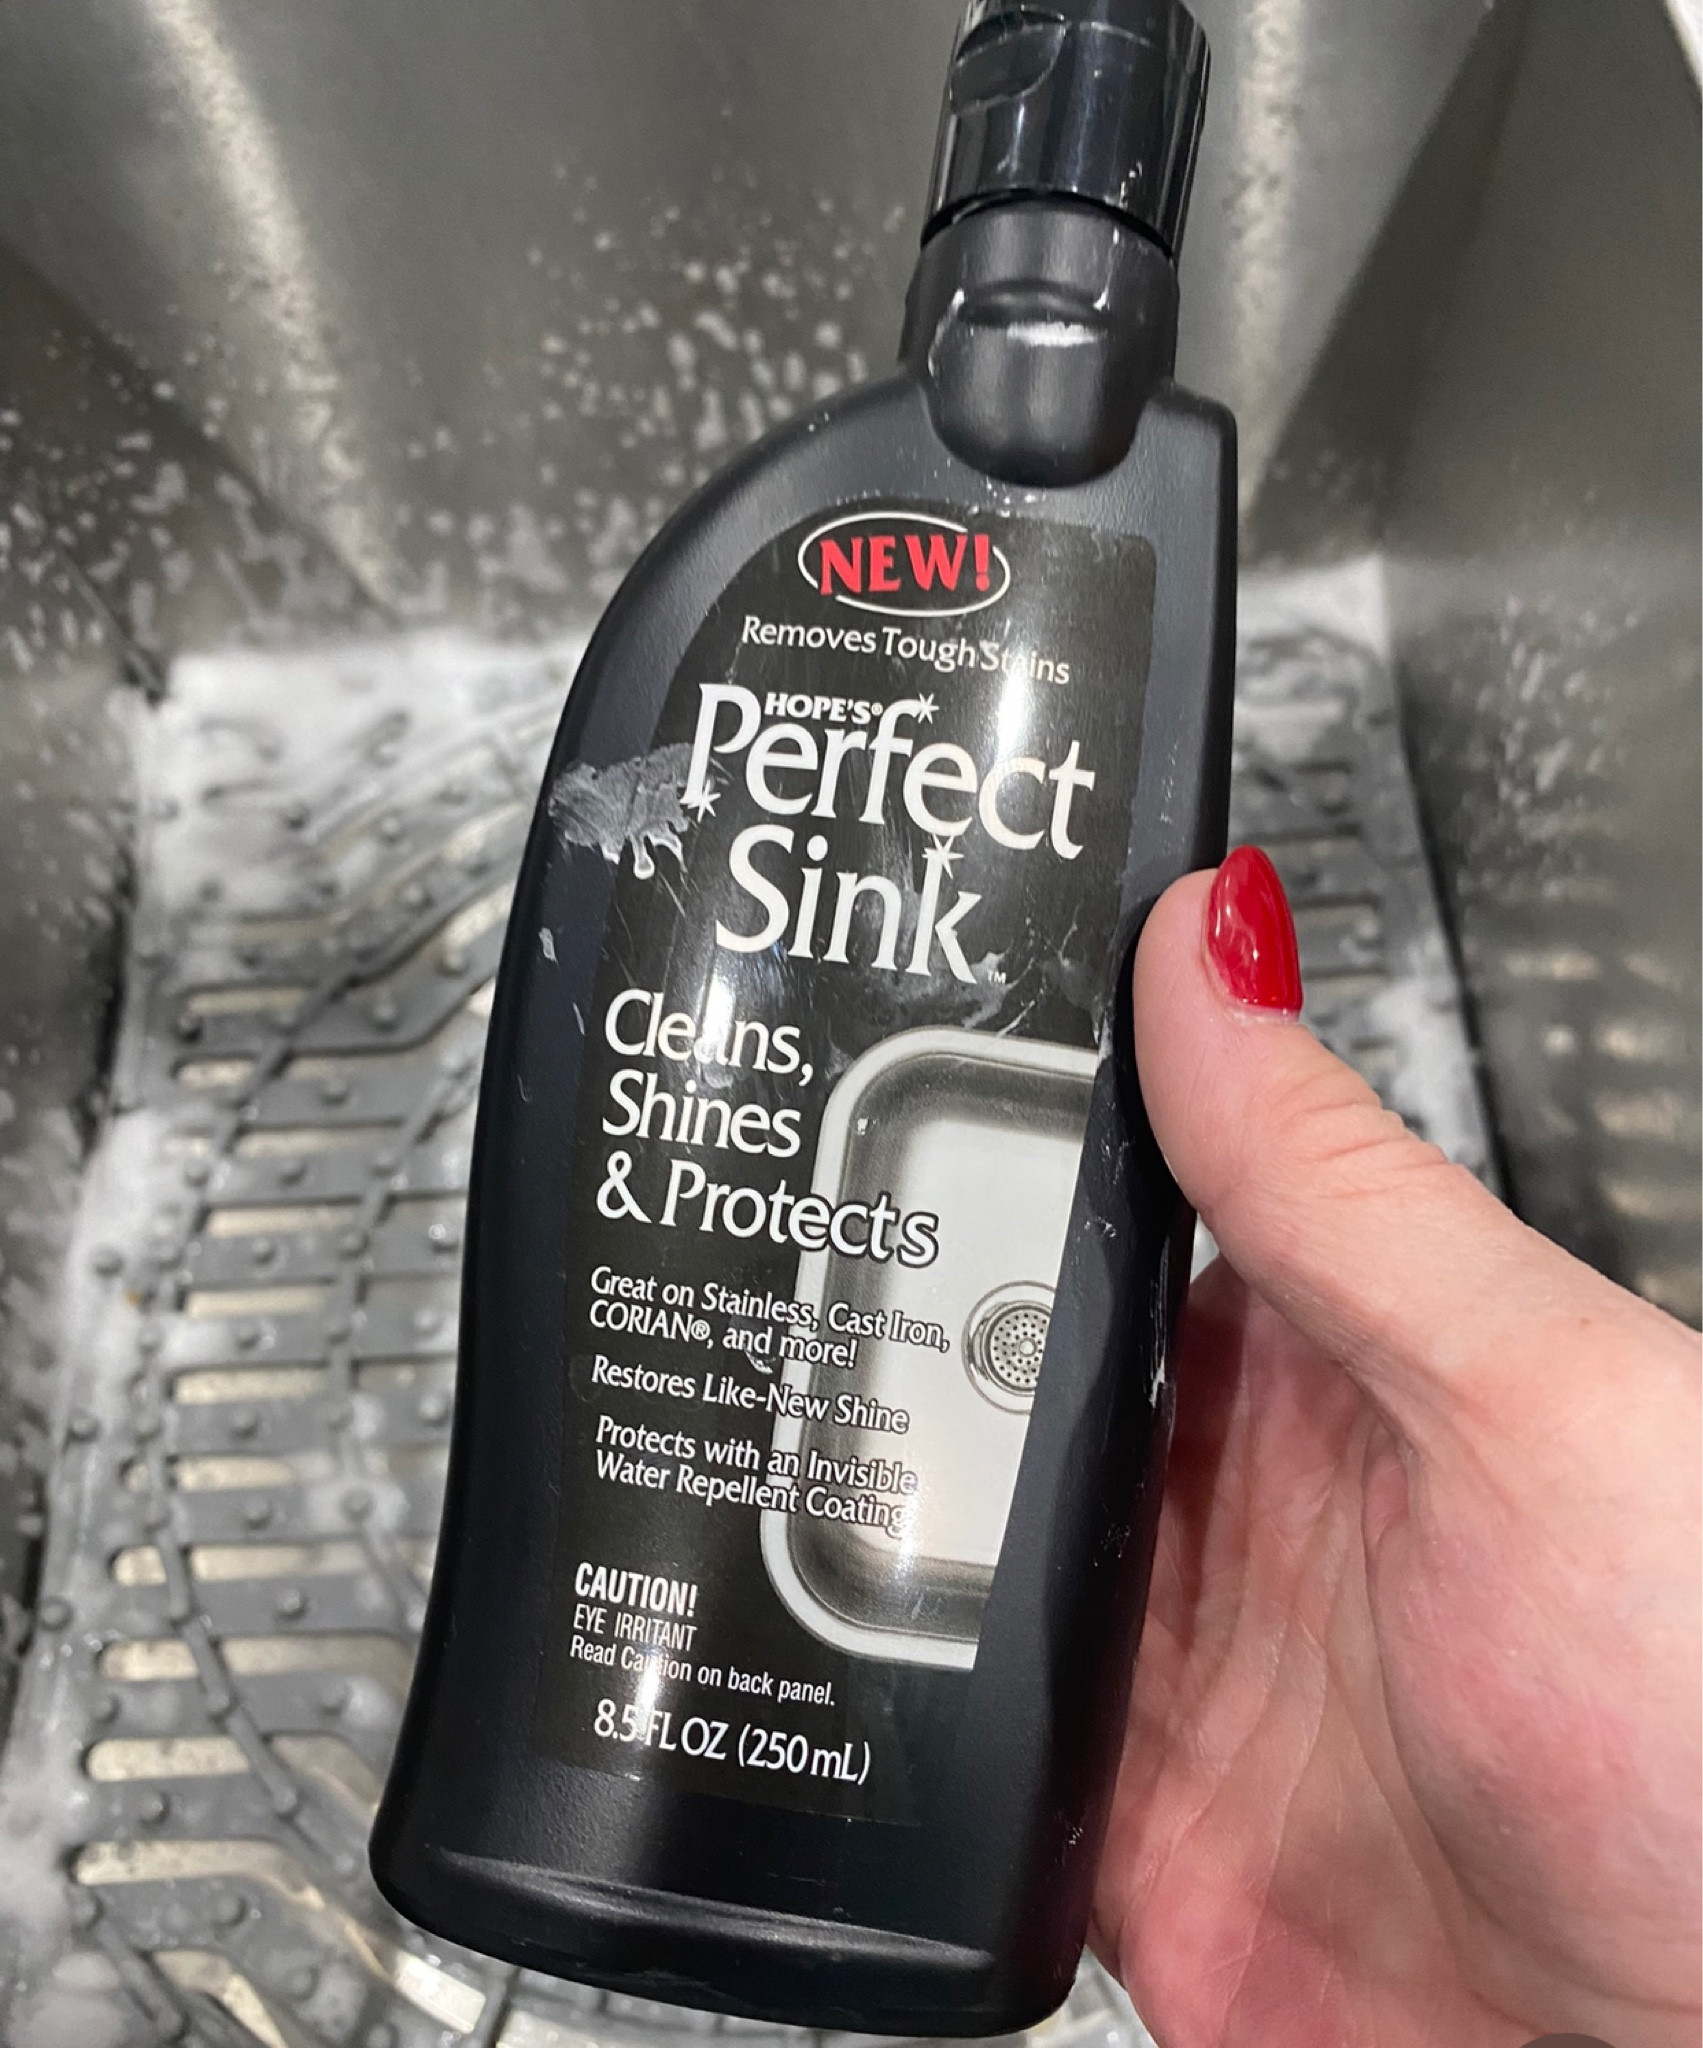 HOPE'S Perfect Sink Cleaner and Polish, Restorative  